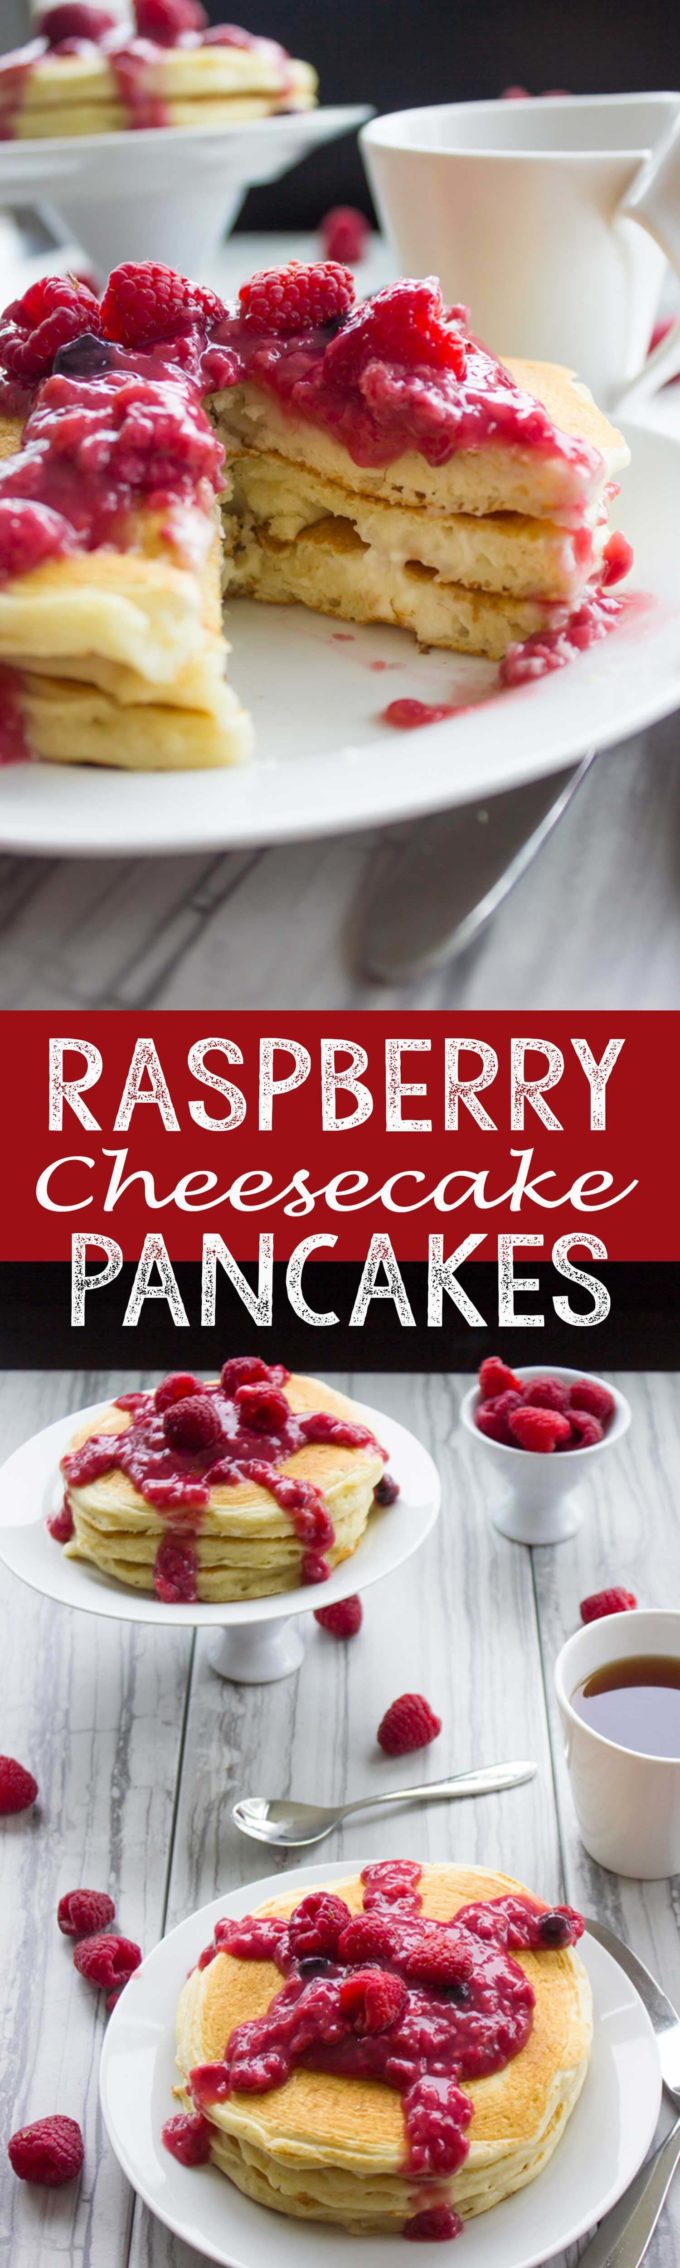 Raspberry Cheesecake Pancakes are the perfect breakfast option